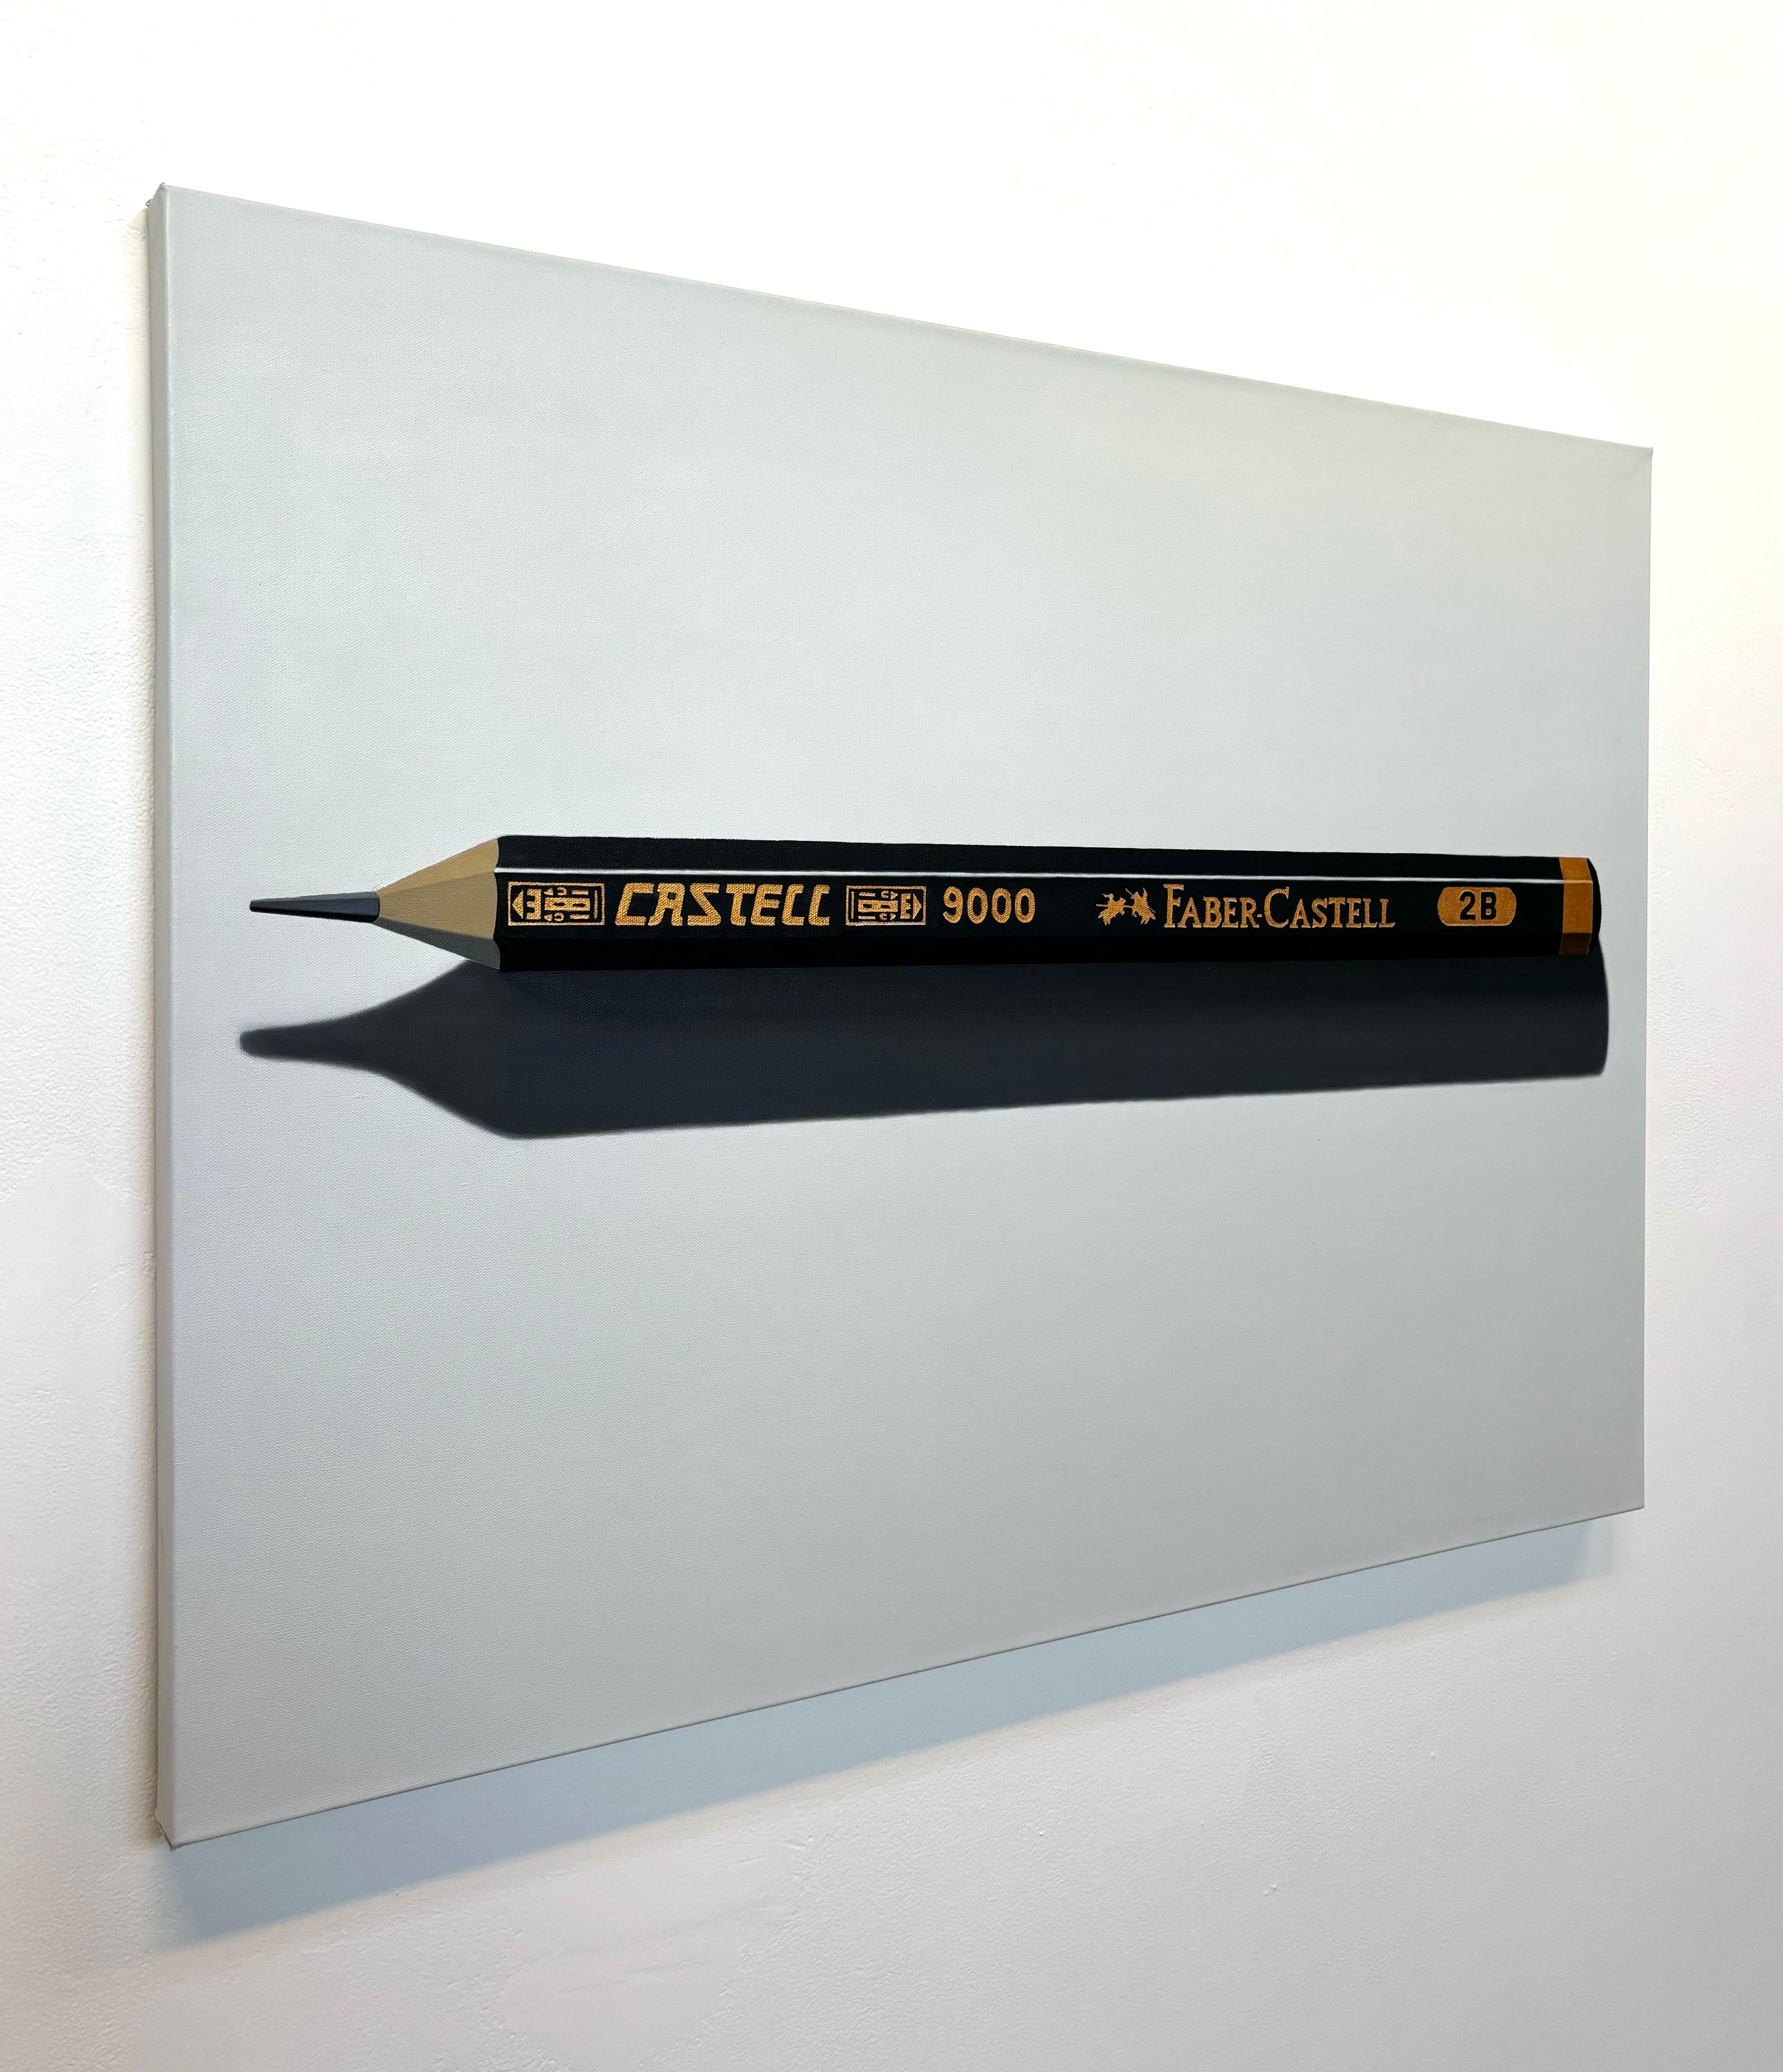 FABER-CASTELL 9000 2B - Painting by Richard Parker